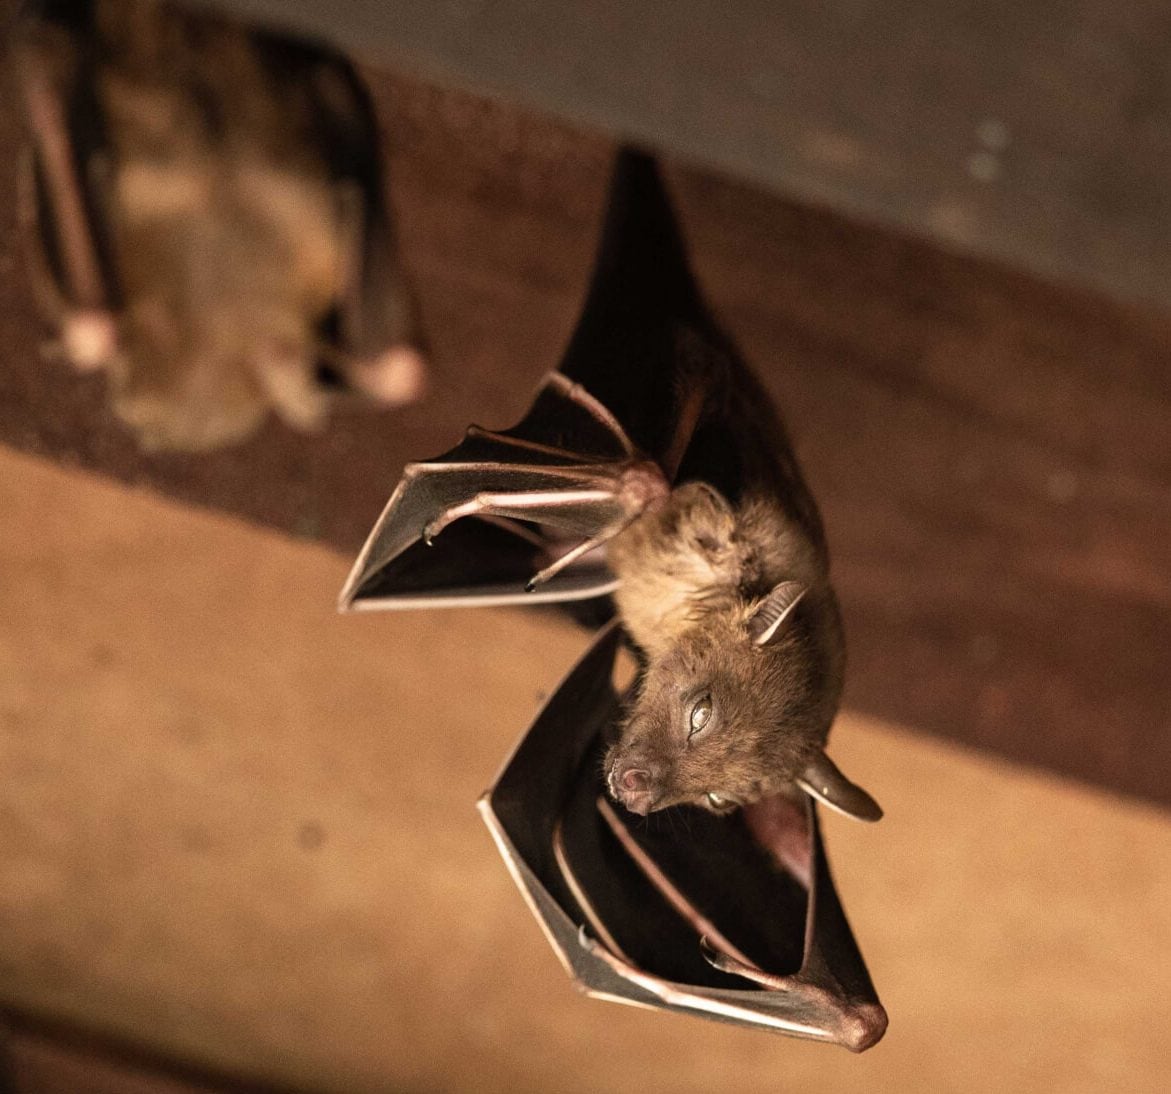 Expert bat removal services for a safe and humane solution in Wilmington